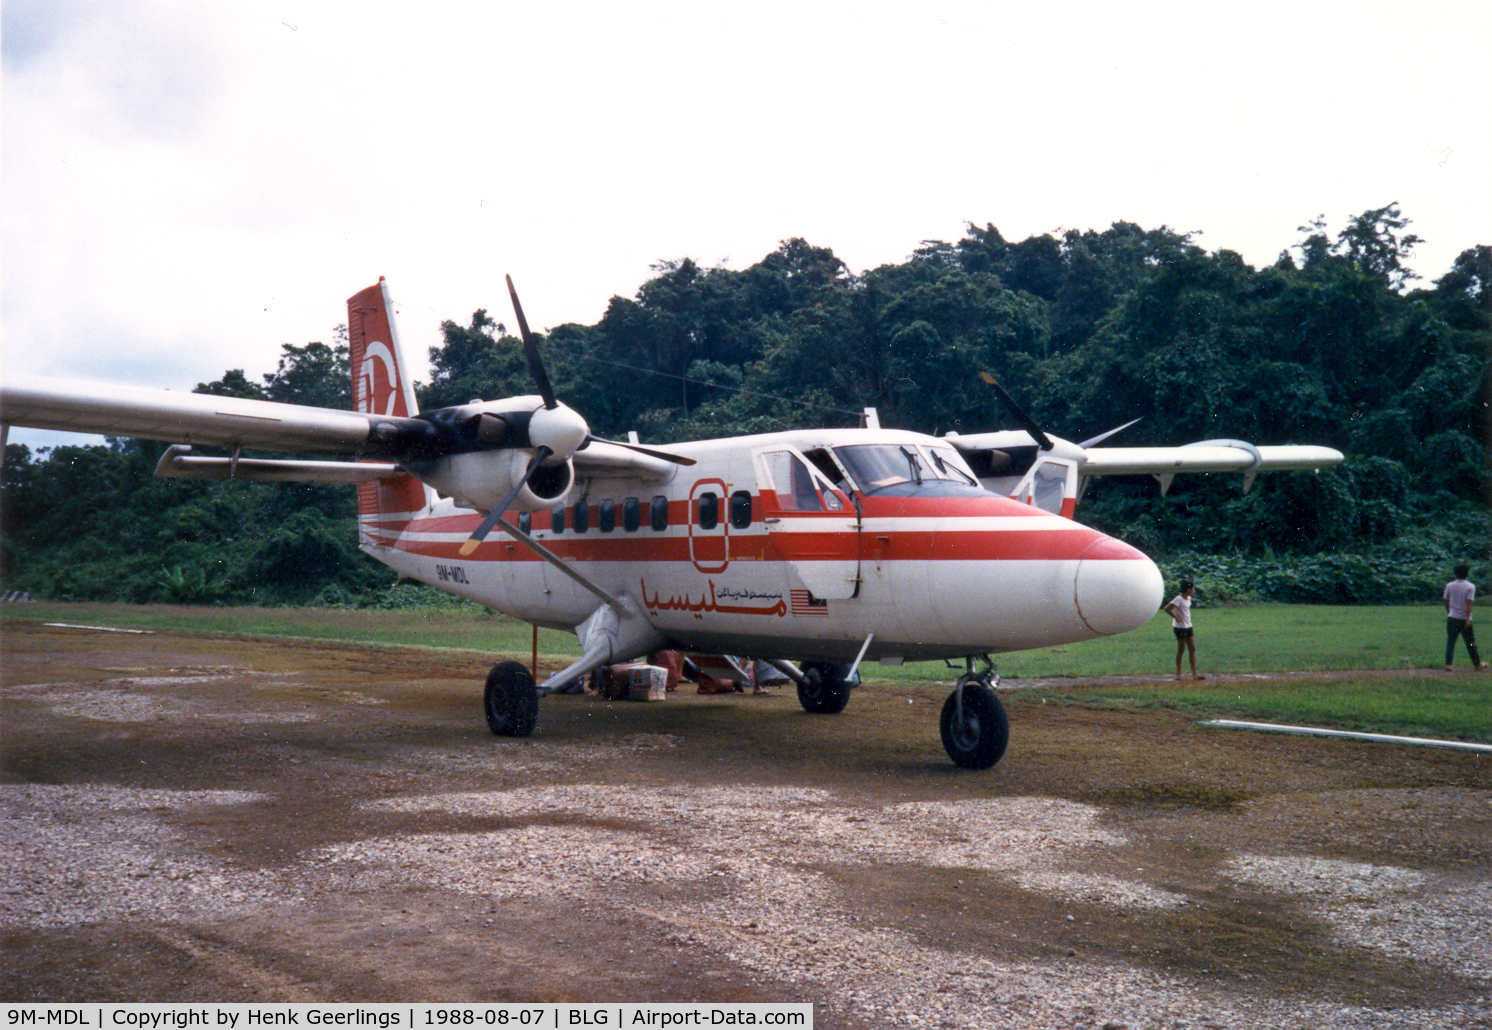 9M-MDL, 1983 De Havilland Canada DHC-6-300 Twin Otter C/N 802, Malaysian Twin Otter , ready for departure to Kapit and Sibu , Sarawak , Aug 1988